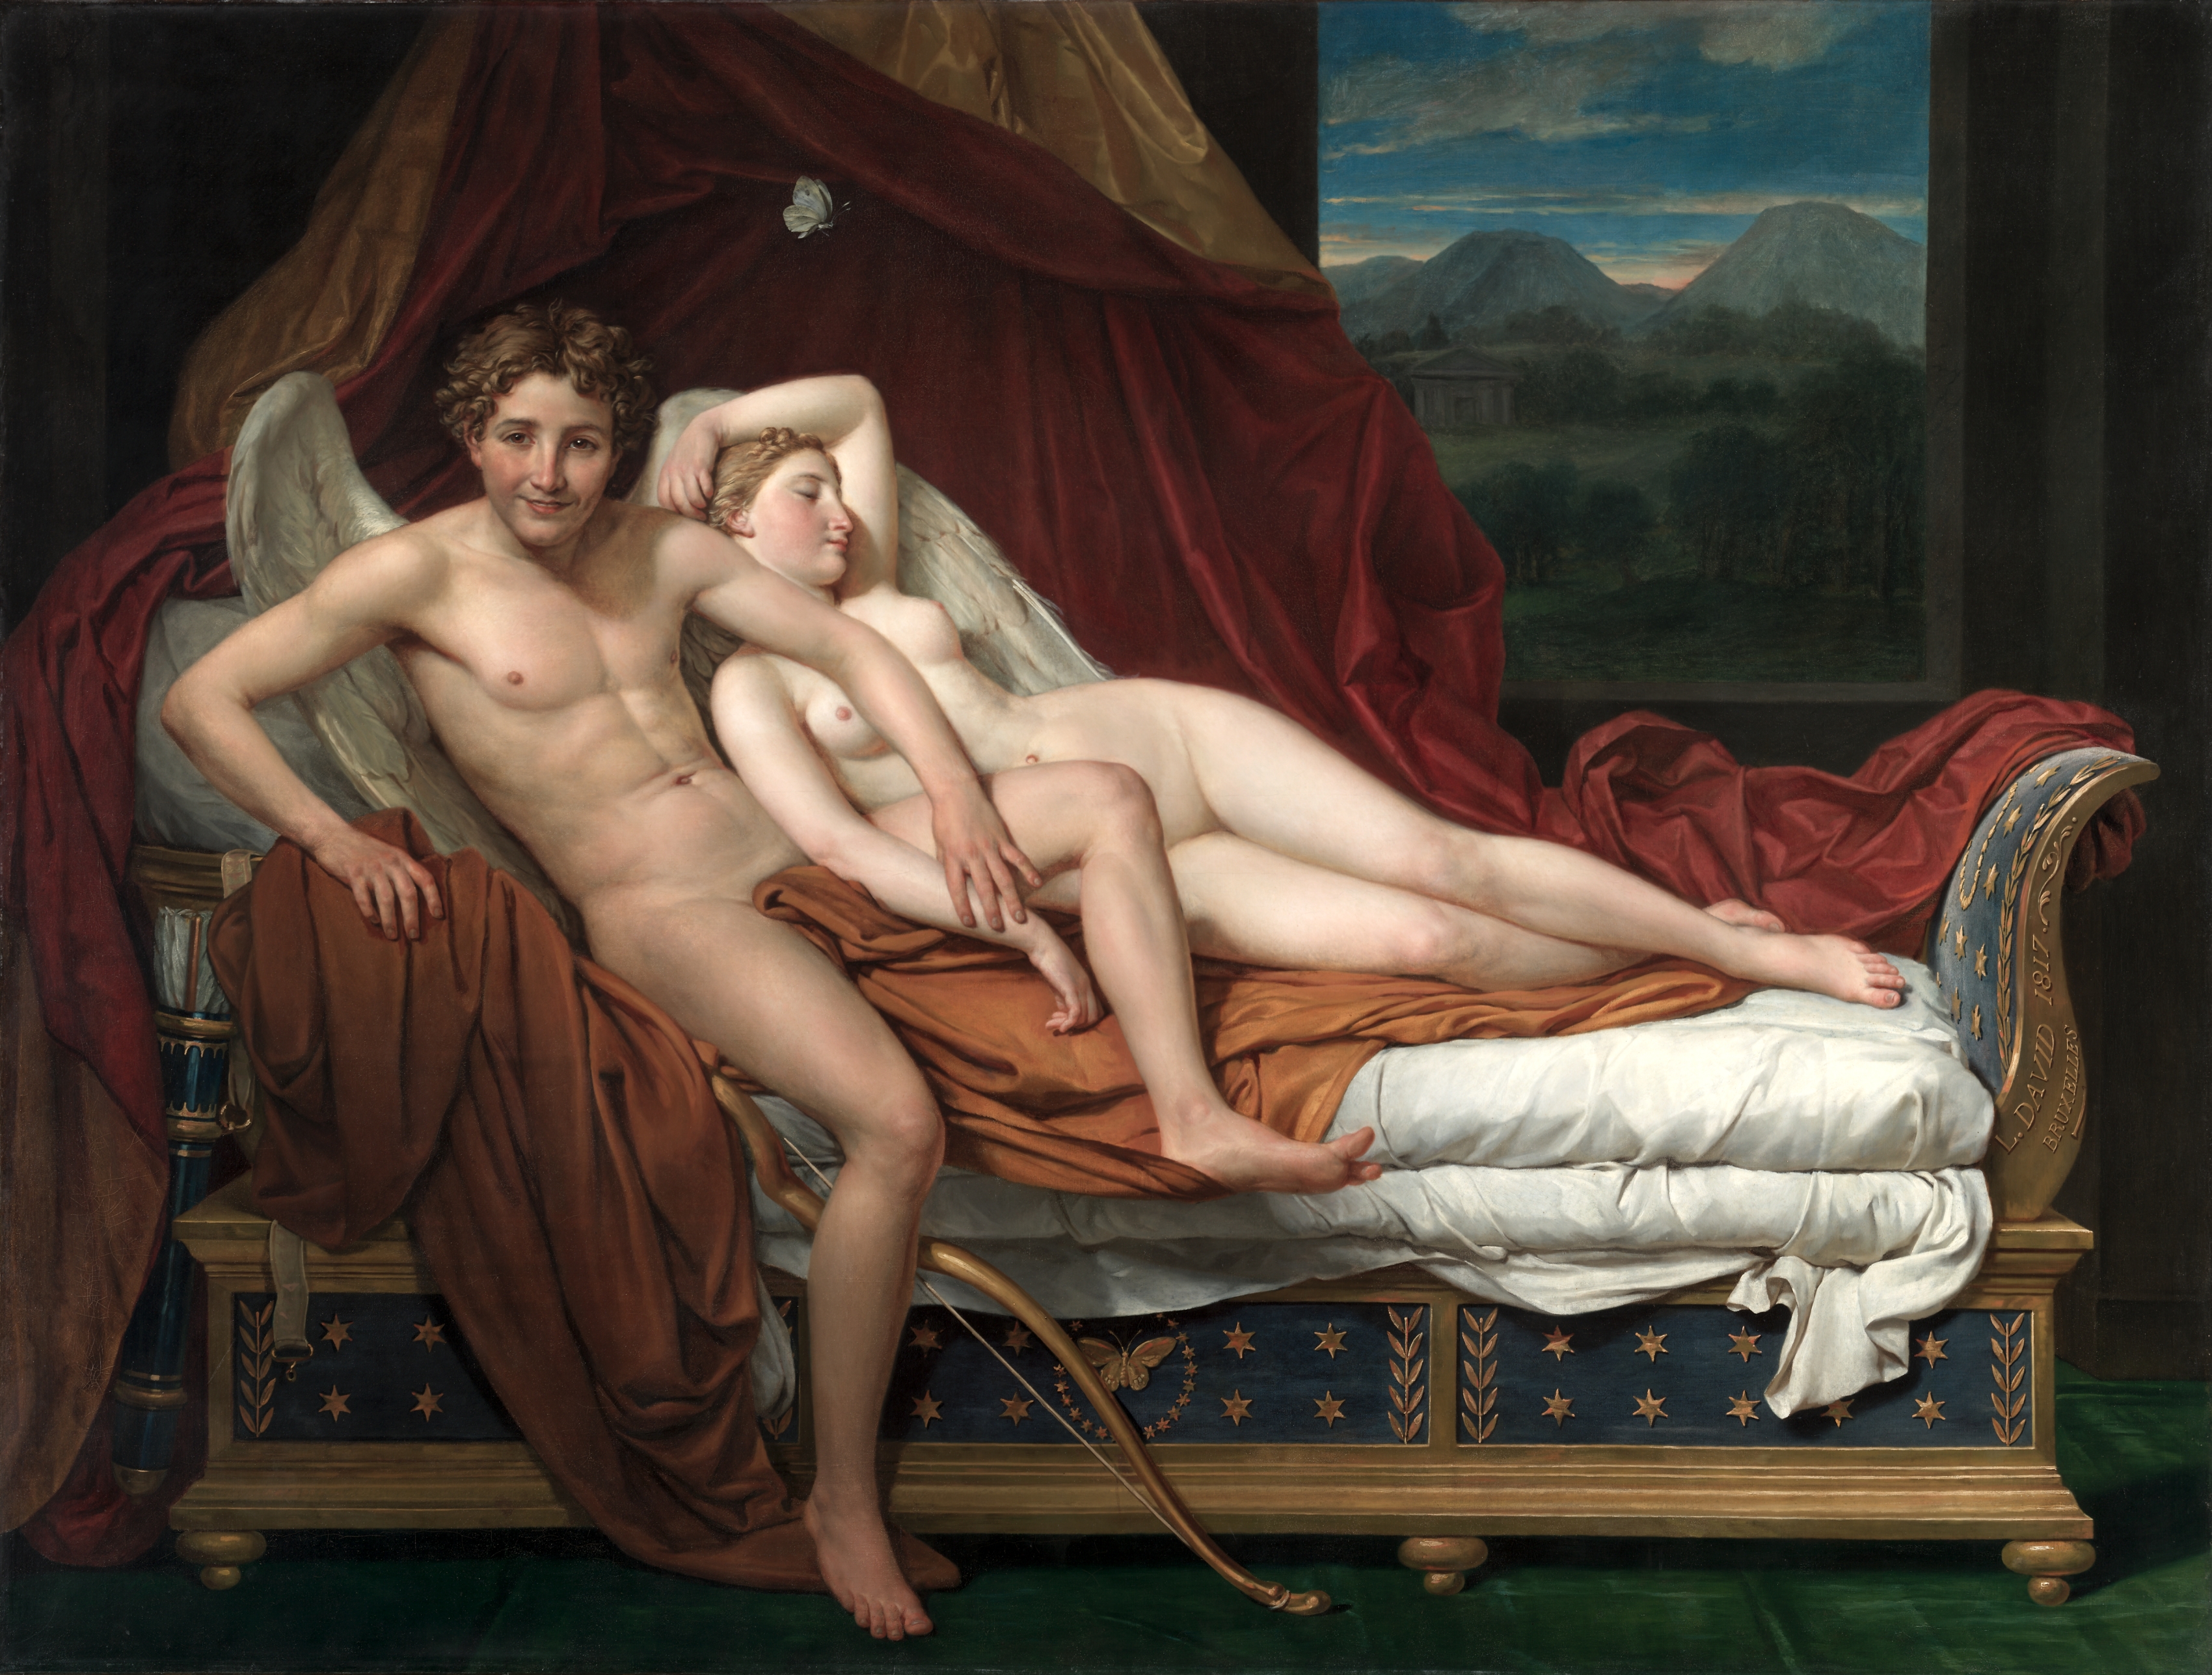 Cupid and Psyche by Jacques-Louis David - 1817 - 184.2 x 241.6 cm Cleveland Museum of Art